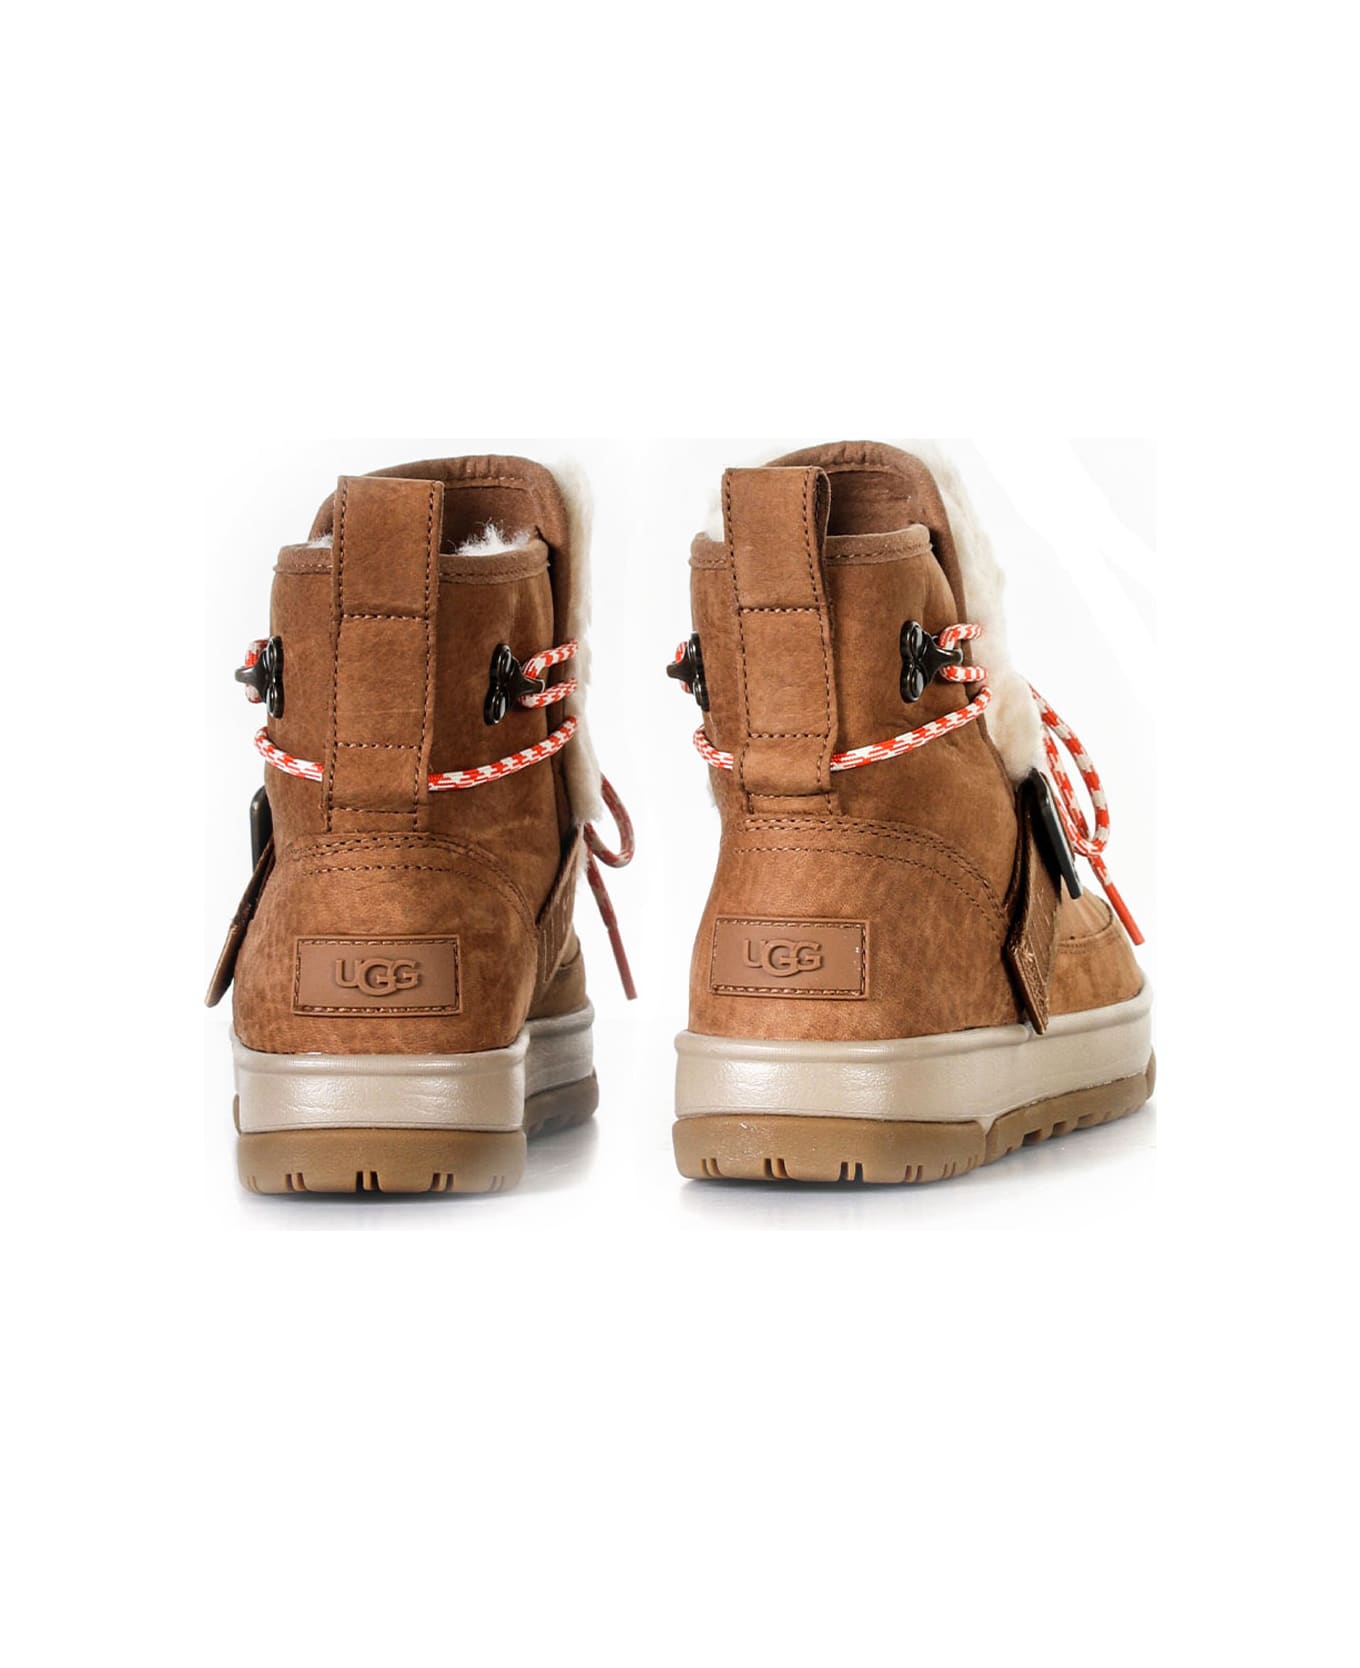 UGG Classic Weather Hiker Boot - CHESTNUT